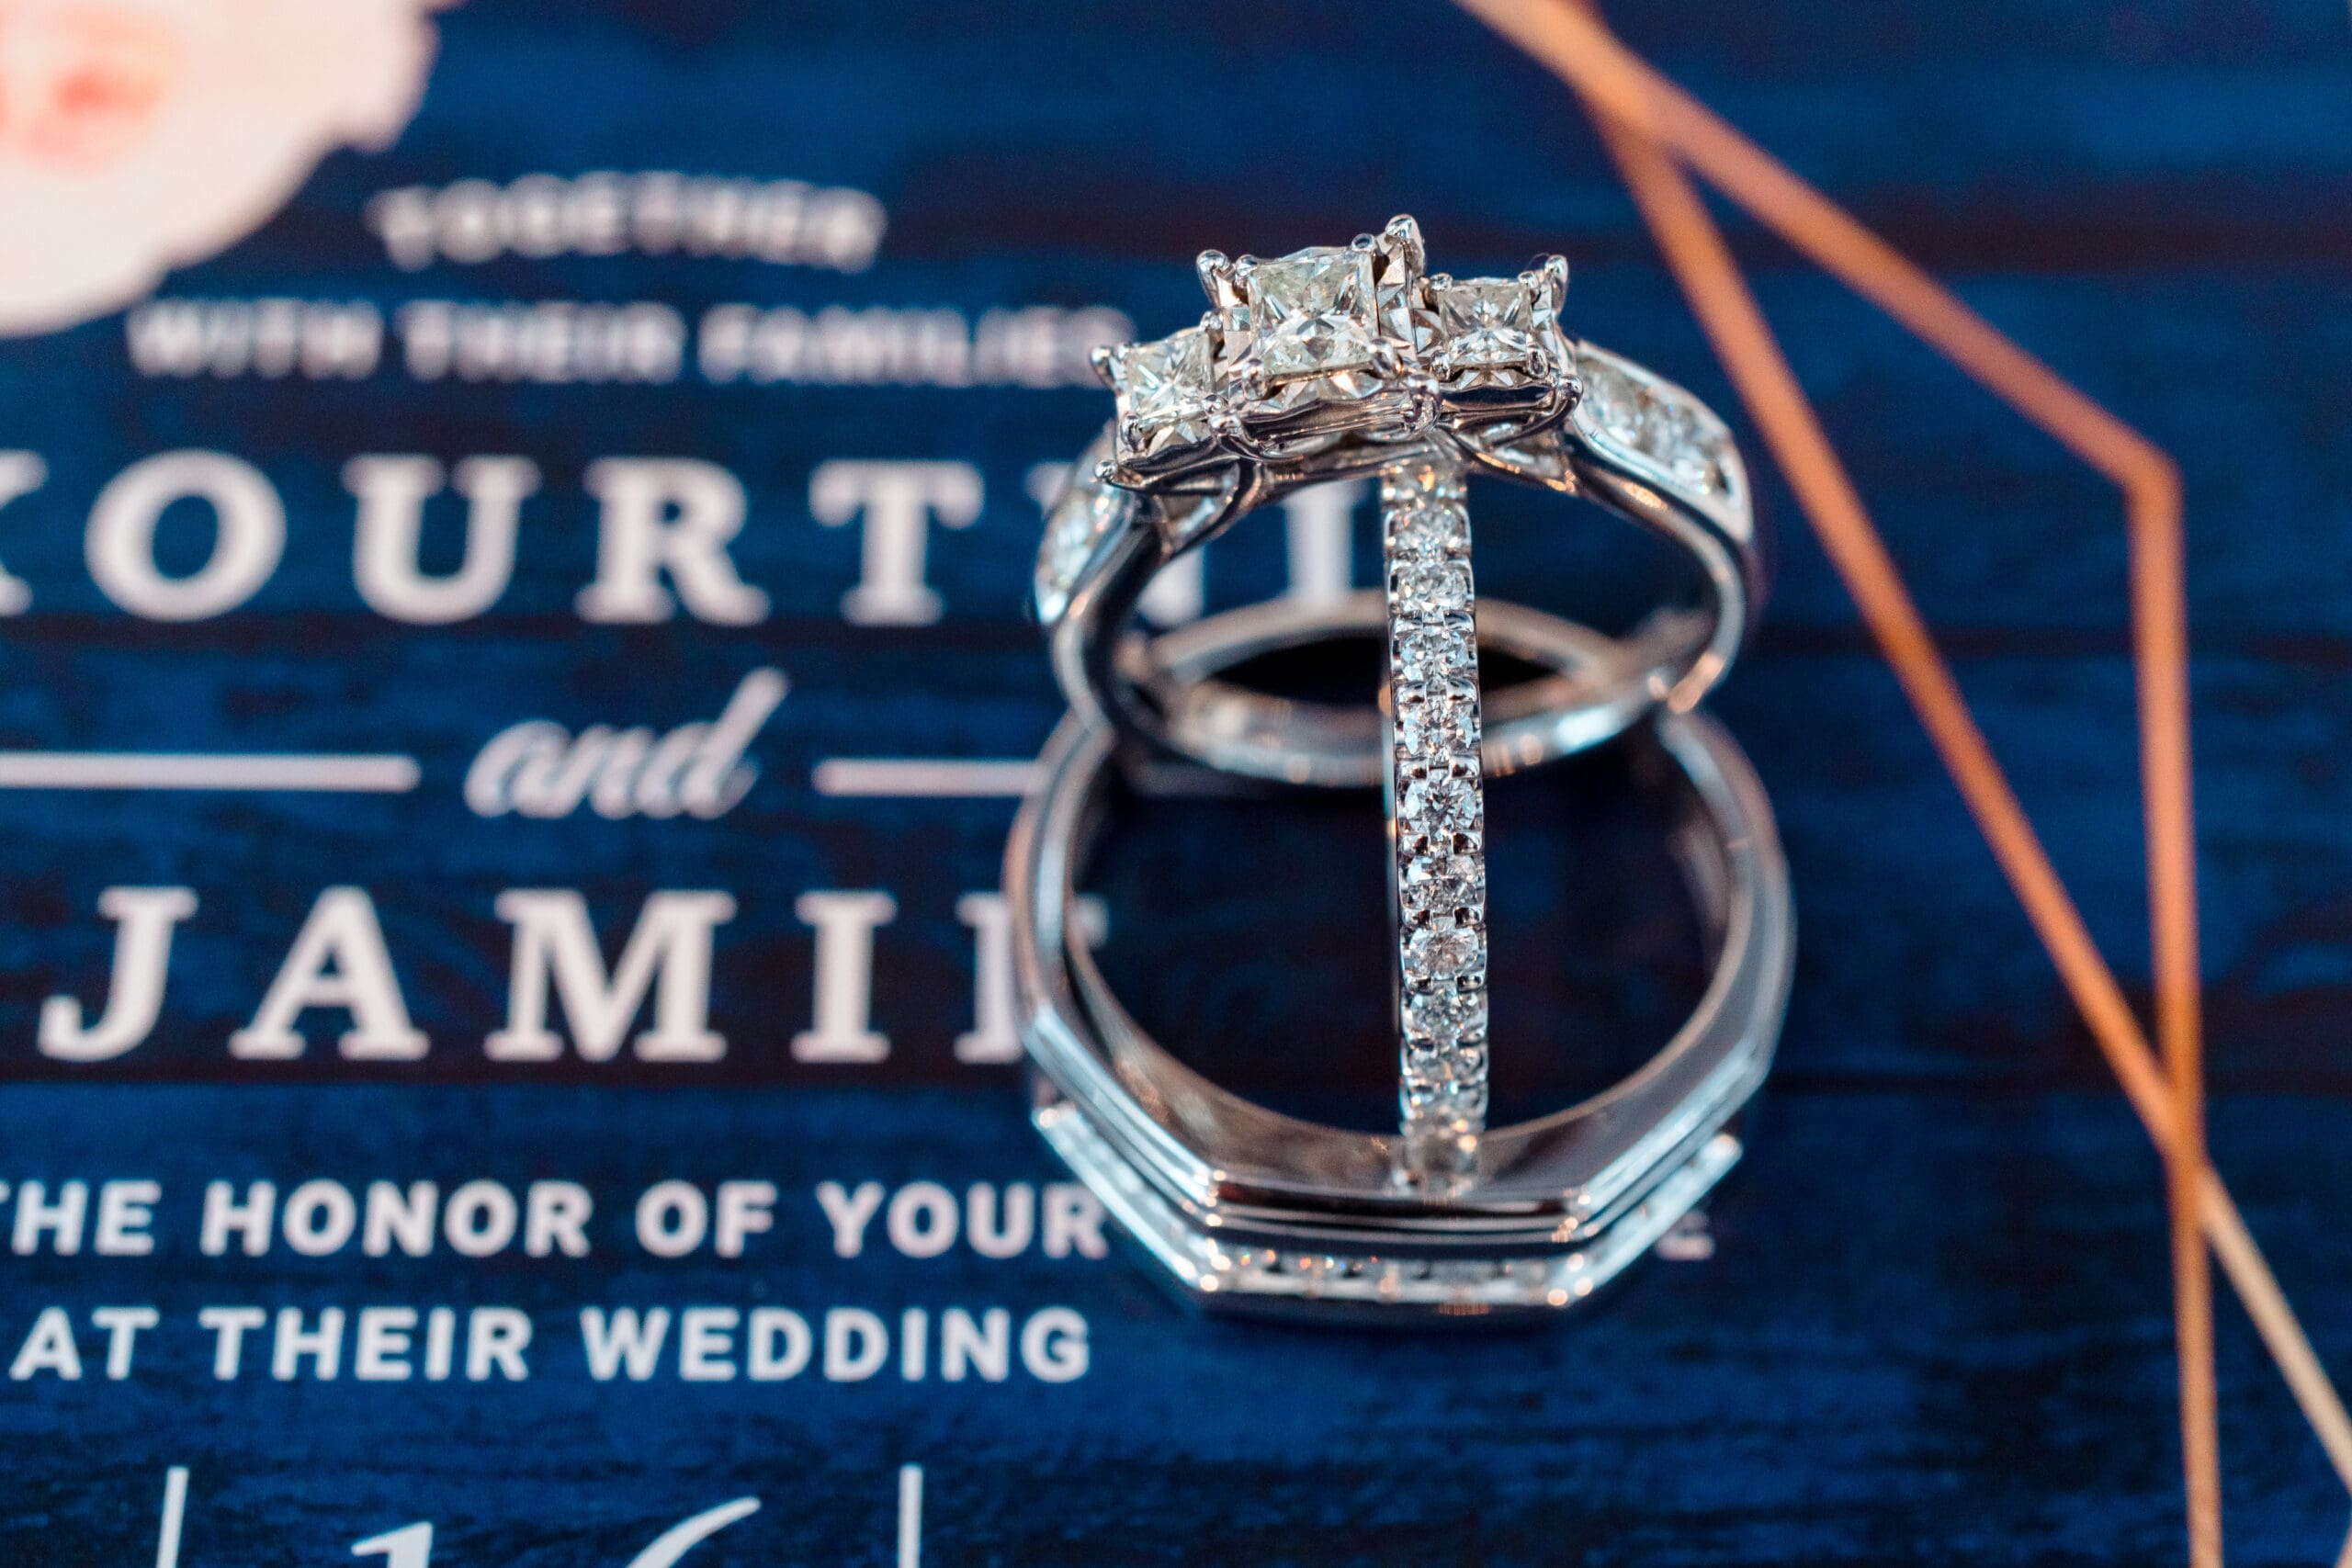 Close-up of the engagement ring and wedding bands displayed on the wedding invitation.